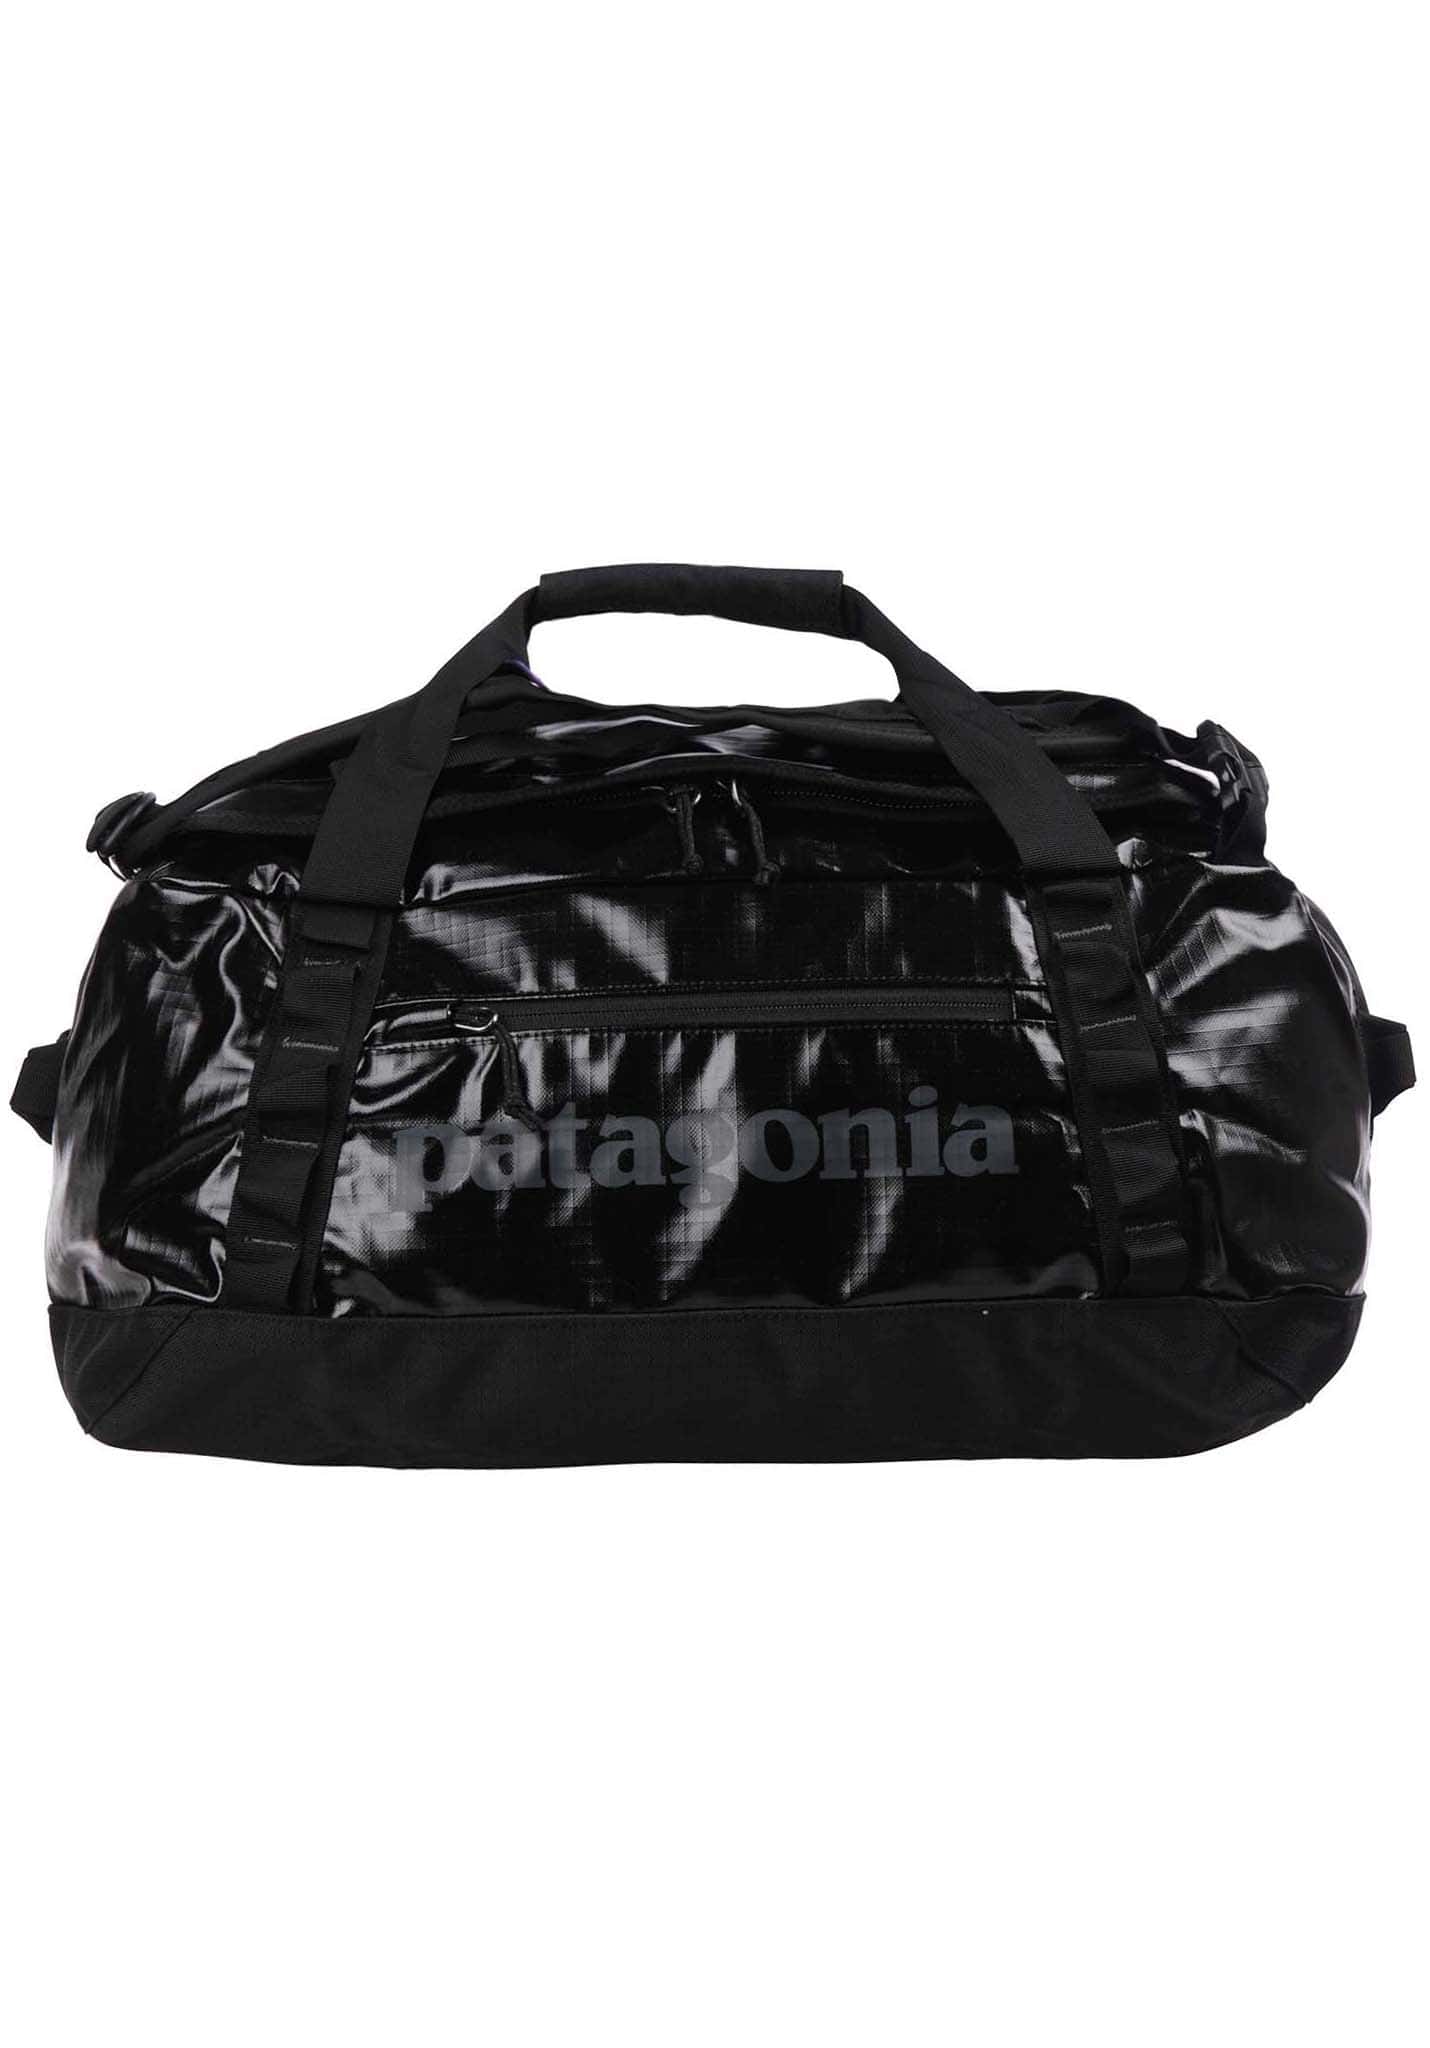 Patagonia Black Hole 55L Tasche black One Size